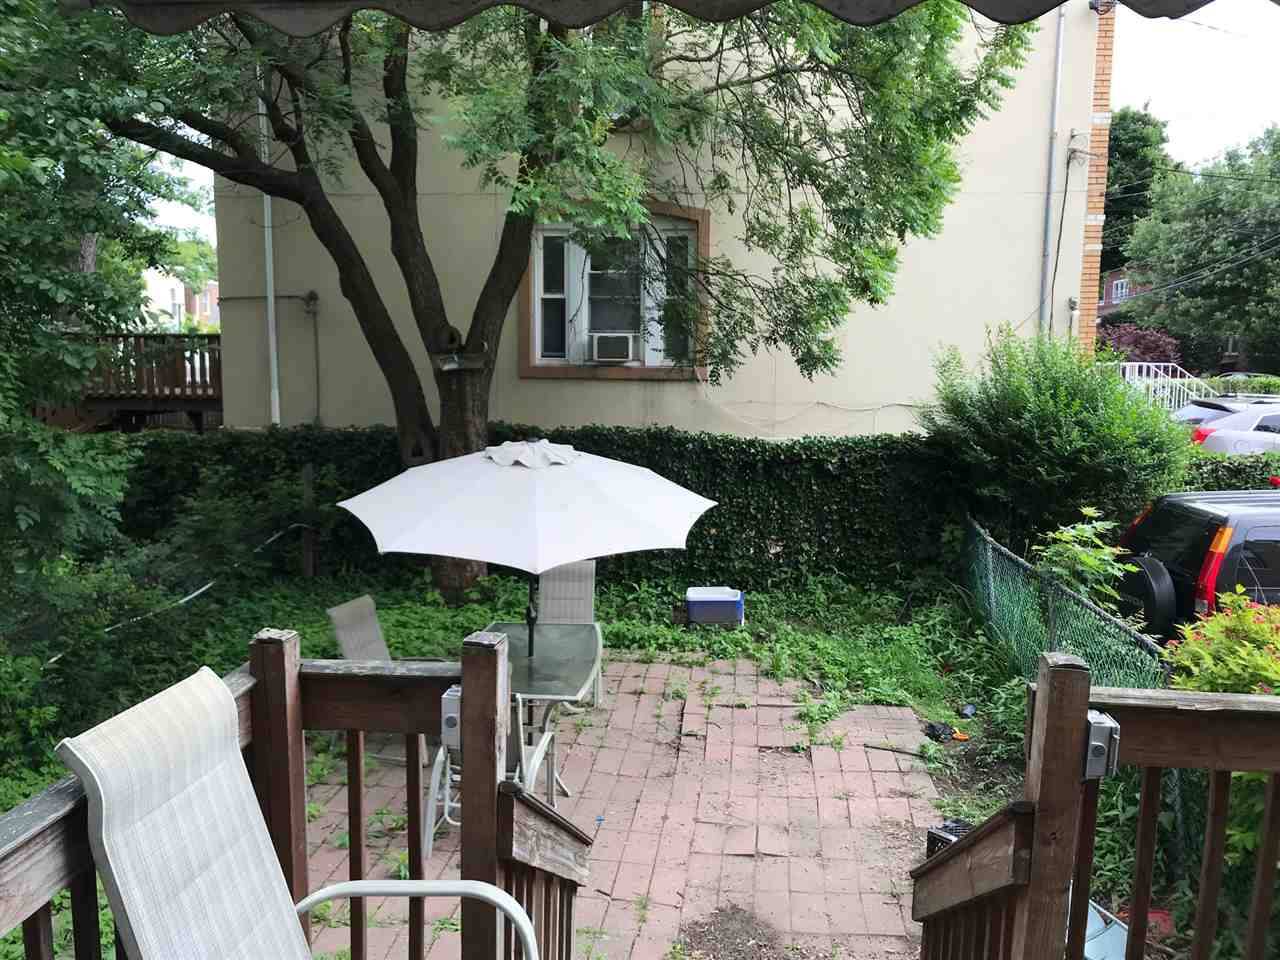 Large 3 Bedroom/1 Bathroom apartment on first floor of building